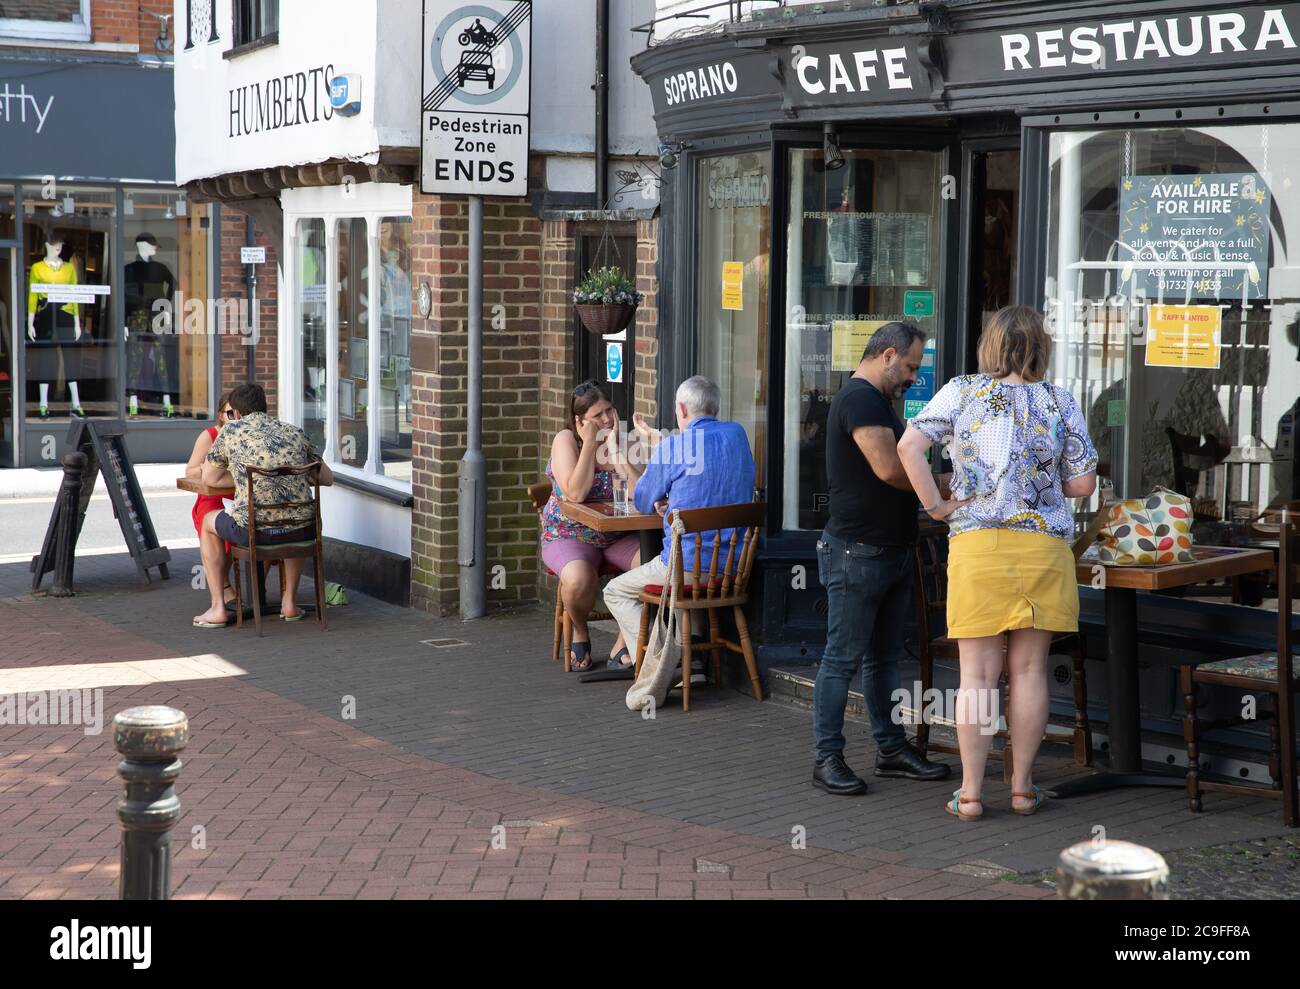 Sevenoaks,Kent,31st July 2020,People dine Alfresco on the Hottest Day of the year in Sevenoaks, Kent. The forecast is for 32C sunny with a gentle breeze and is to be cooler for the weekend.Credit: Keith Larby/Alamy Live News Stock Photo